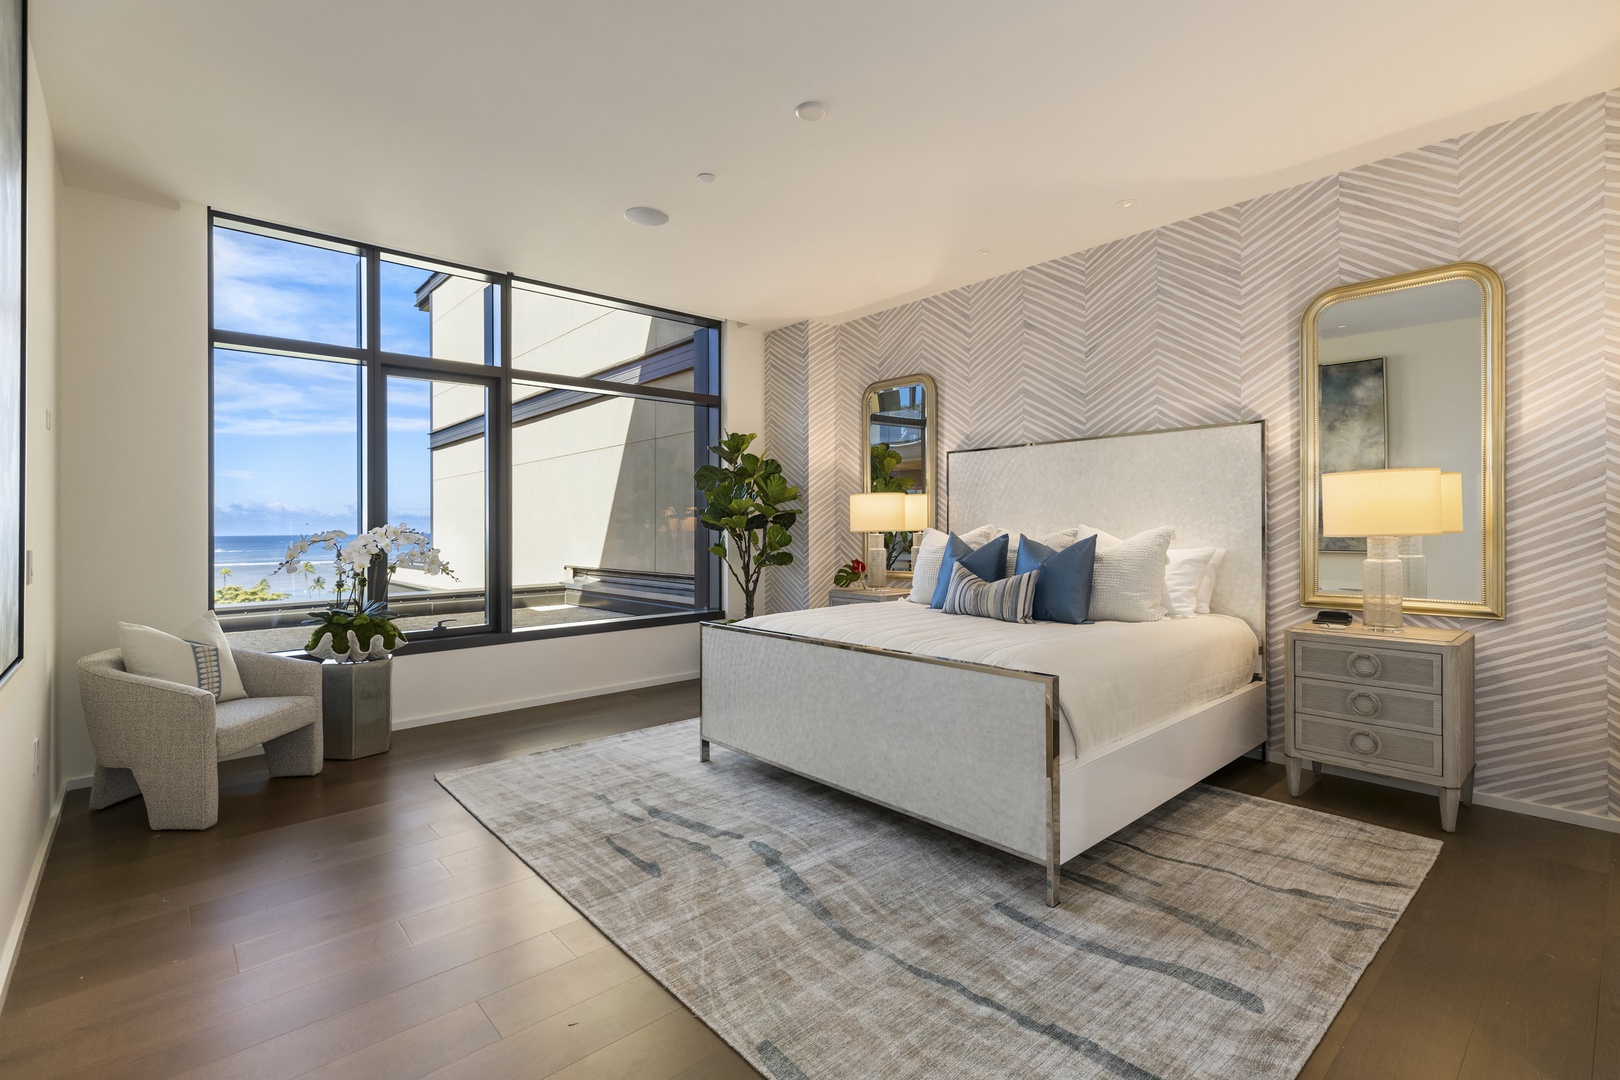 Honolulu Vacation Rentals, Park Lane Sky Resort - The primary suite has a king bed, ocean views, central A/C, and an ensuite bath